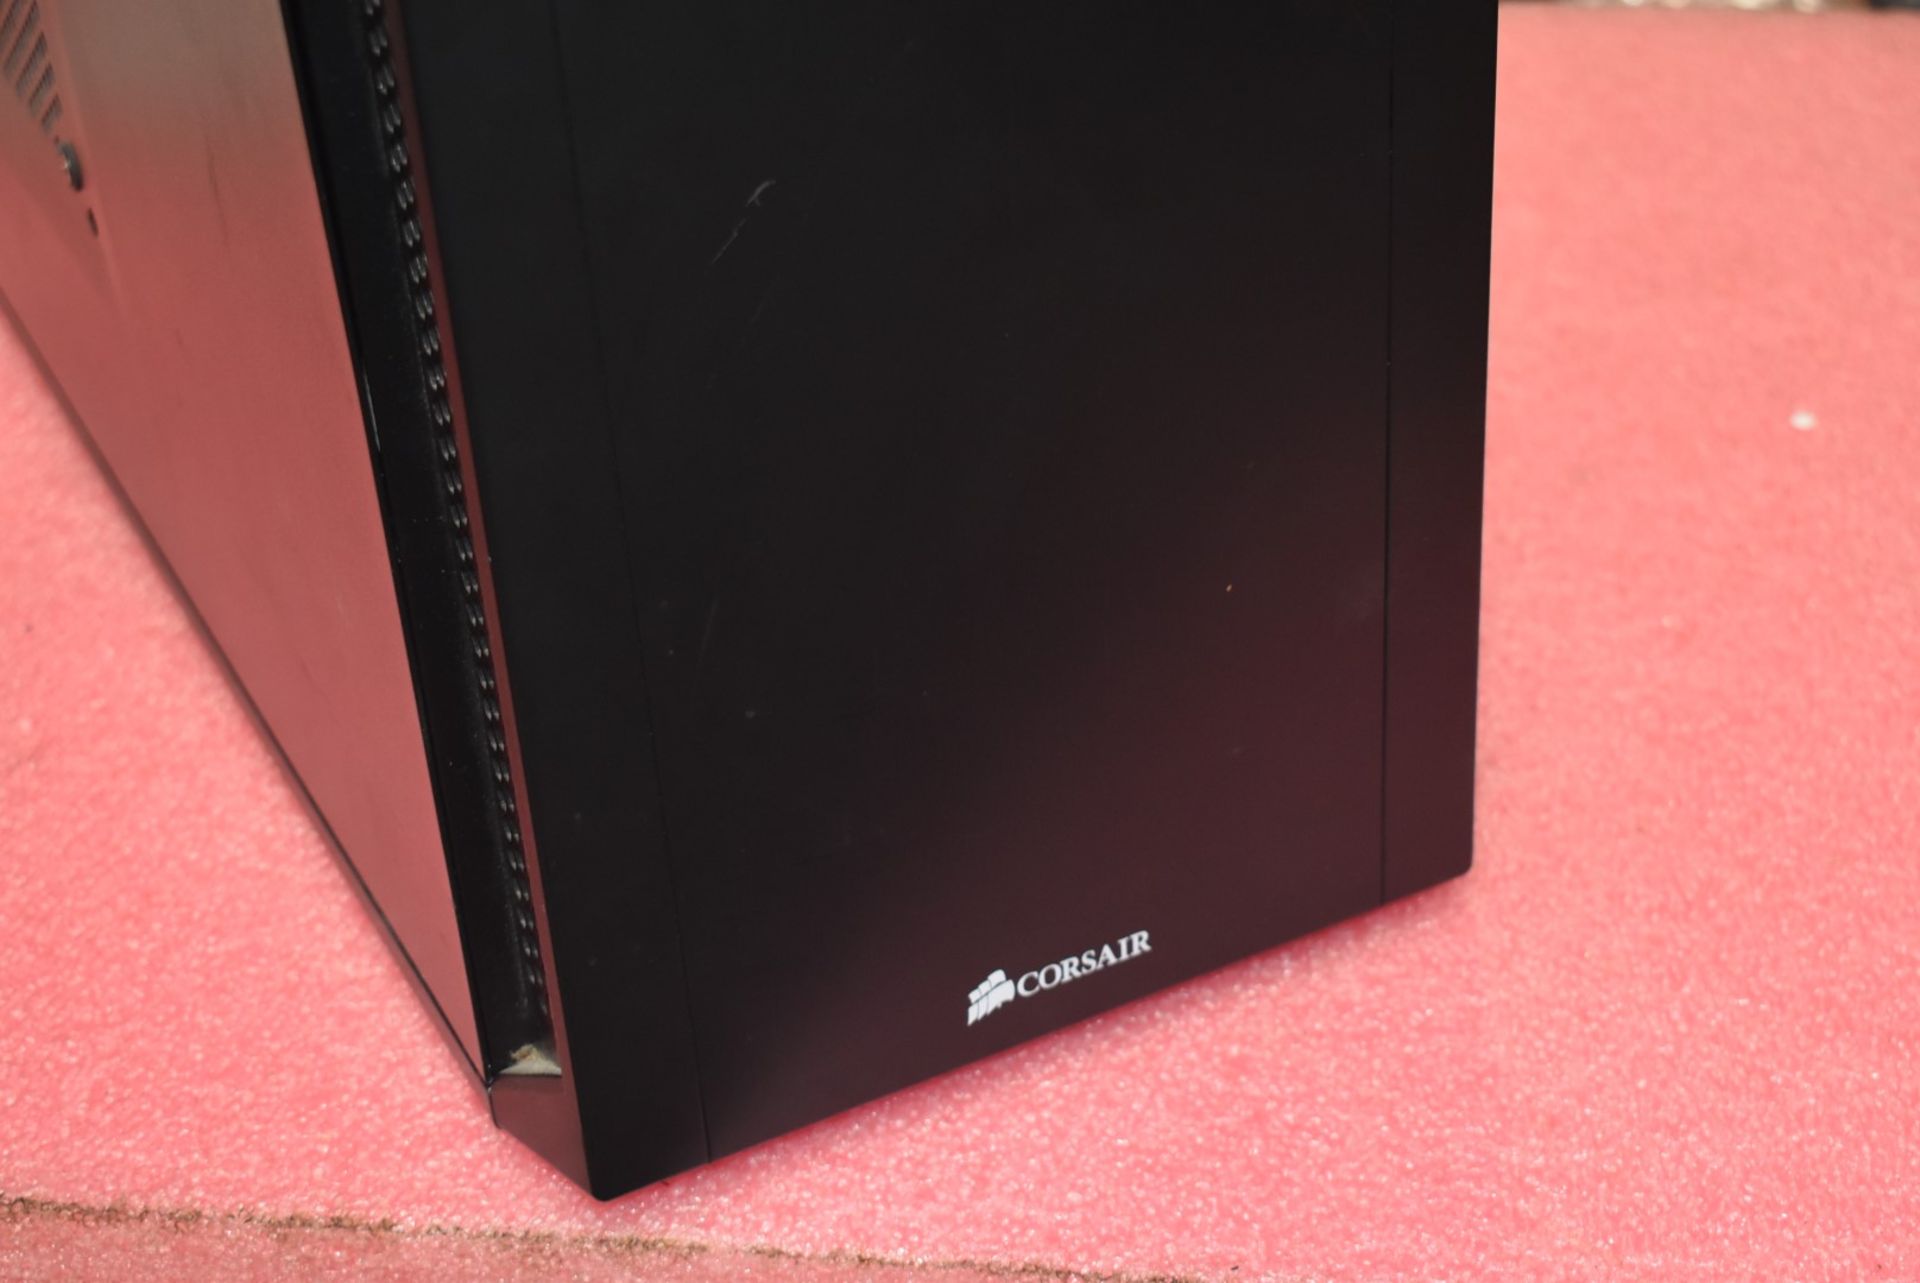 1 x Desktop Gaming PC Featuring an AMD FX6350 Processor, 8GB Ram and a GTX1050ti Graphics Card - Image 3 of 6